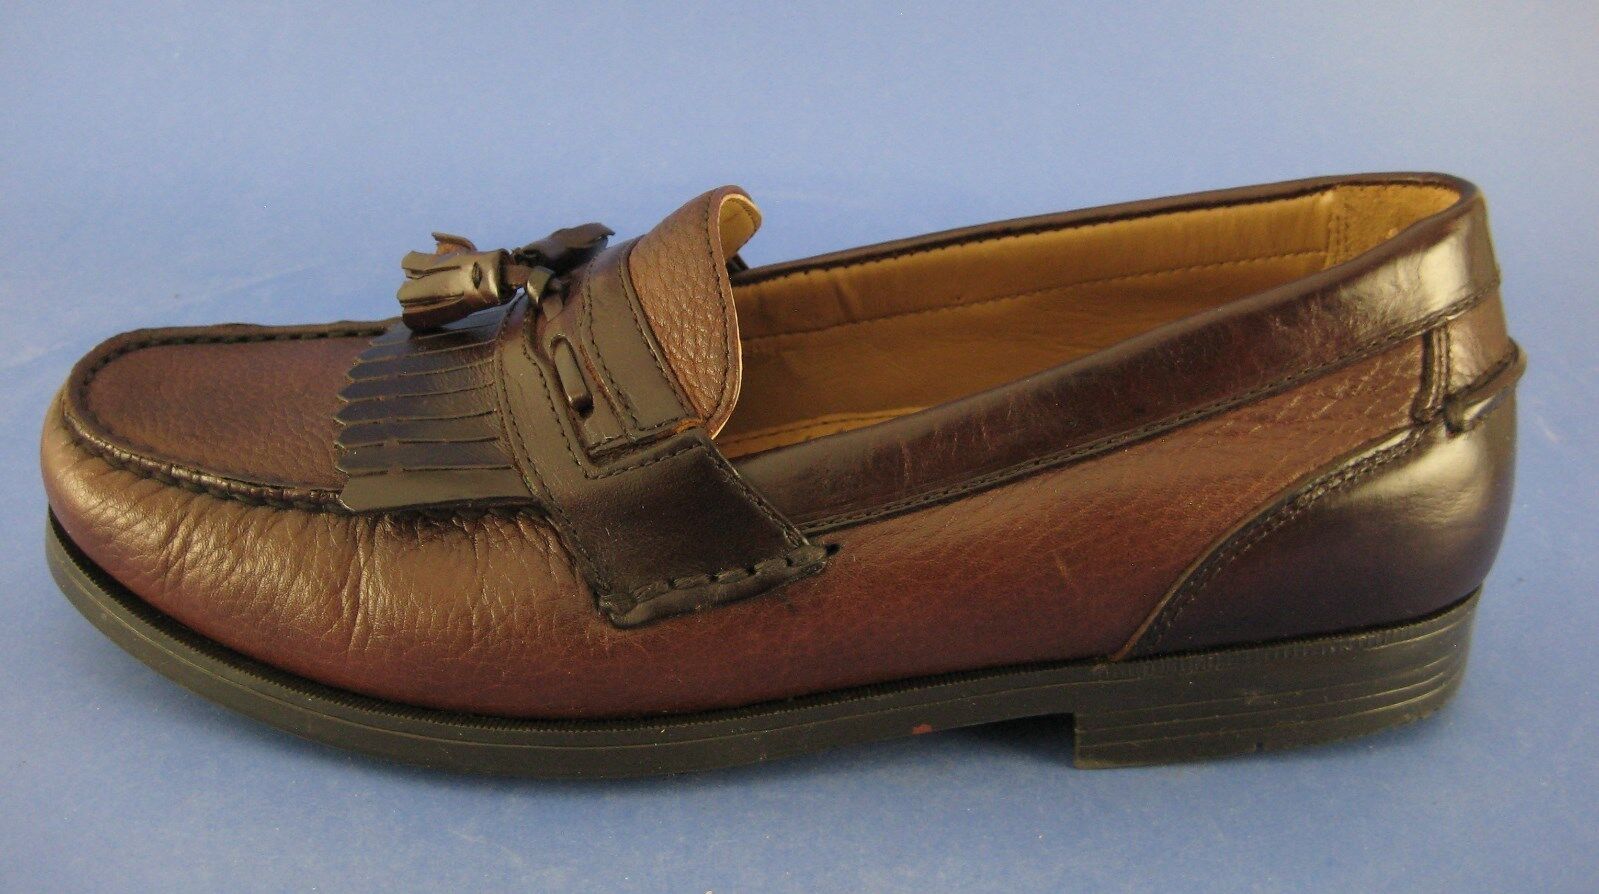 dockers loafers with tassels